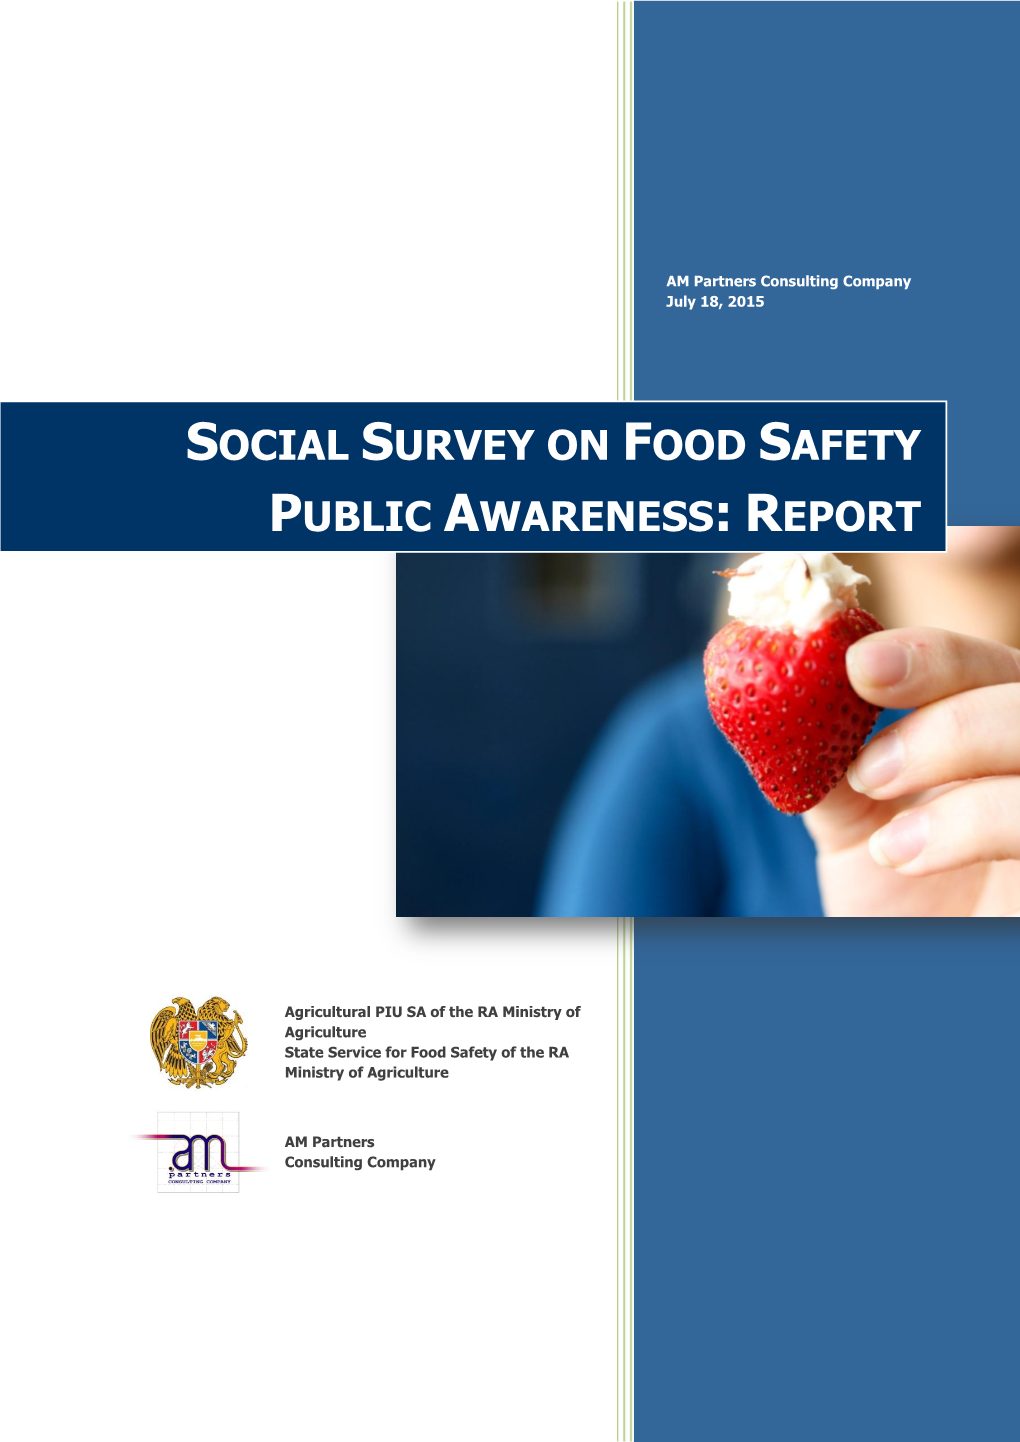 Engthening Food Safety Institutional Capacities) of the Project